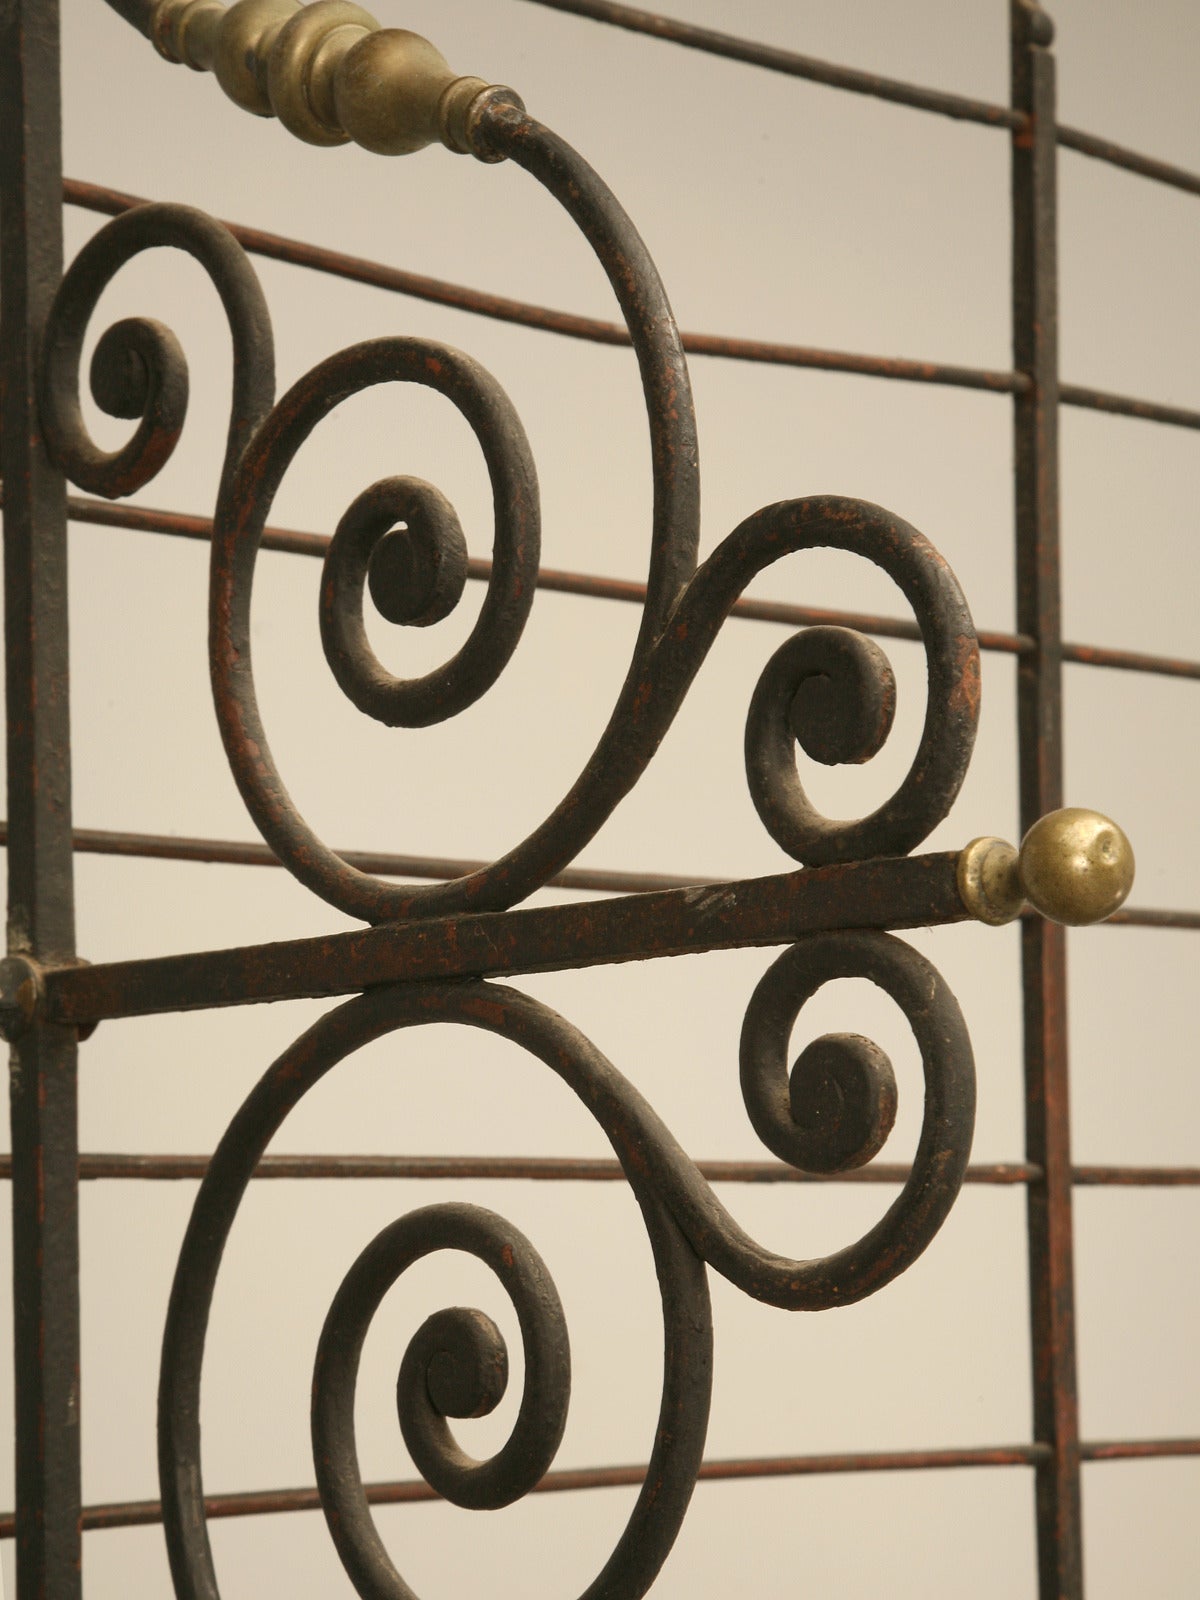 Turn of the century authentic French Baker's Rack made in Paris. We left the rack exactly as received and although it is tempting to polish the brass, we did not want it to look like a reproduction. Should you prefer the brass polished, we would be